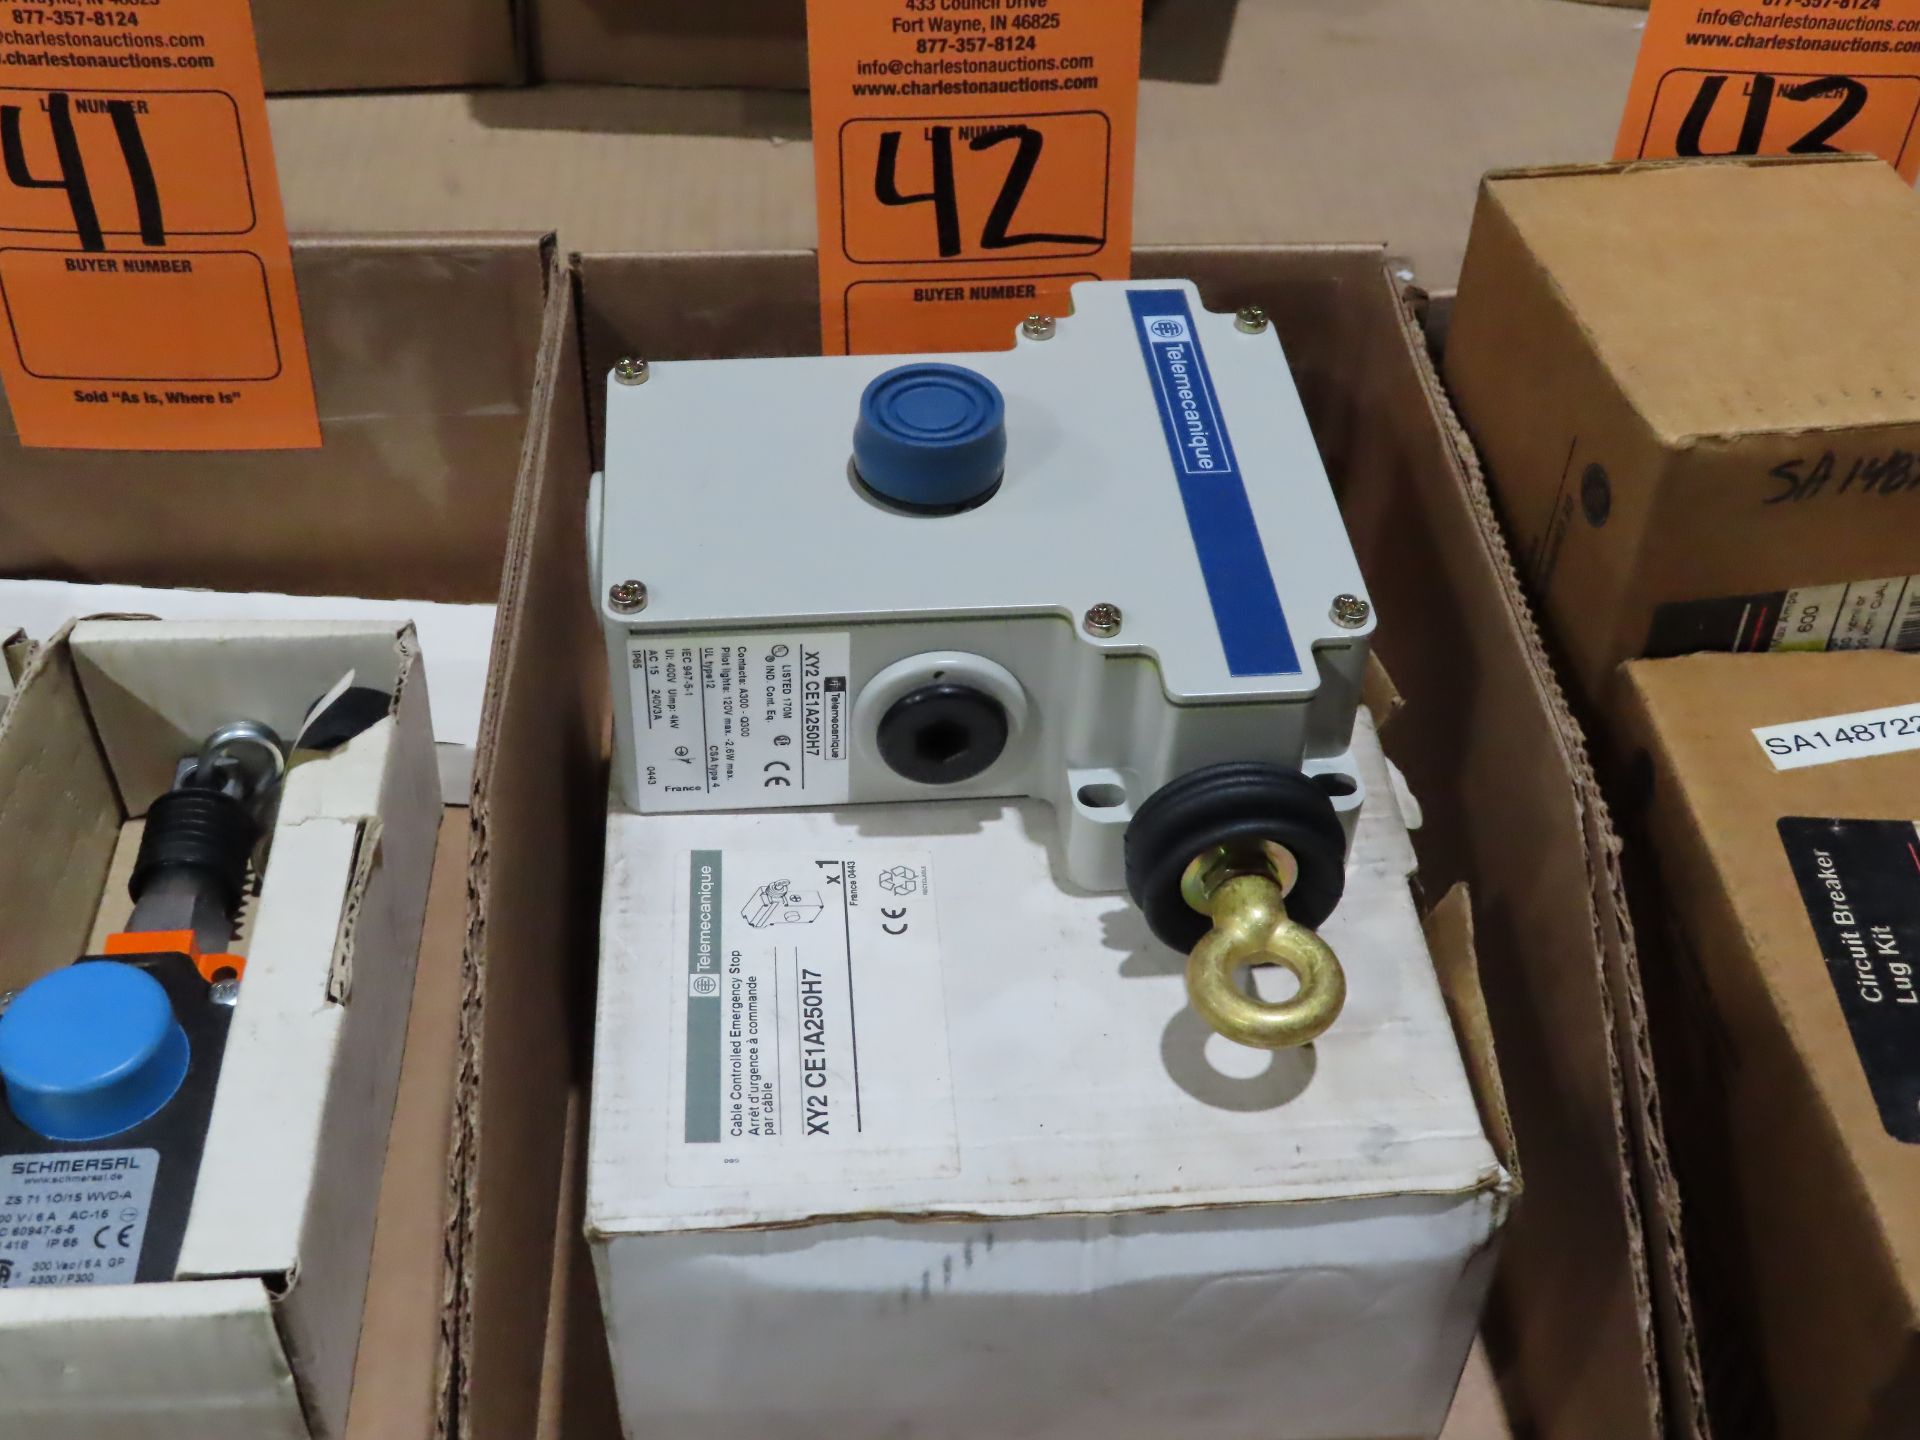 Telemecanique model XY2-CE1A250H7, new in box, as always with Brolyn LLC auctions, all lots can be